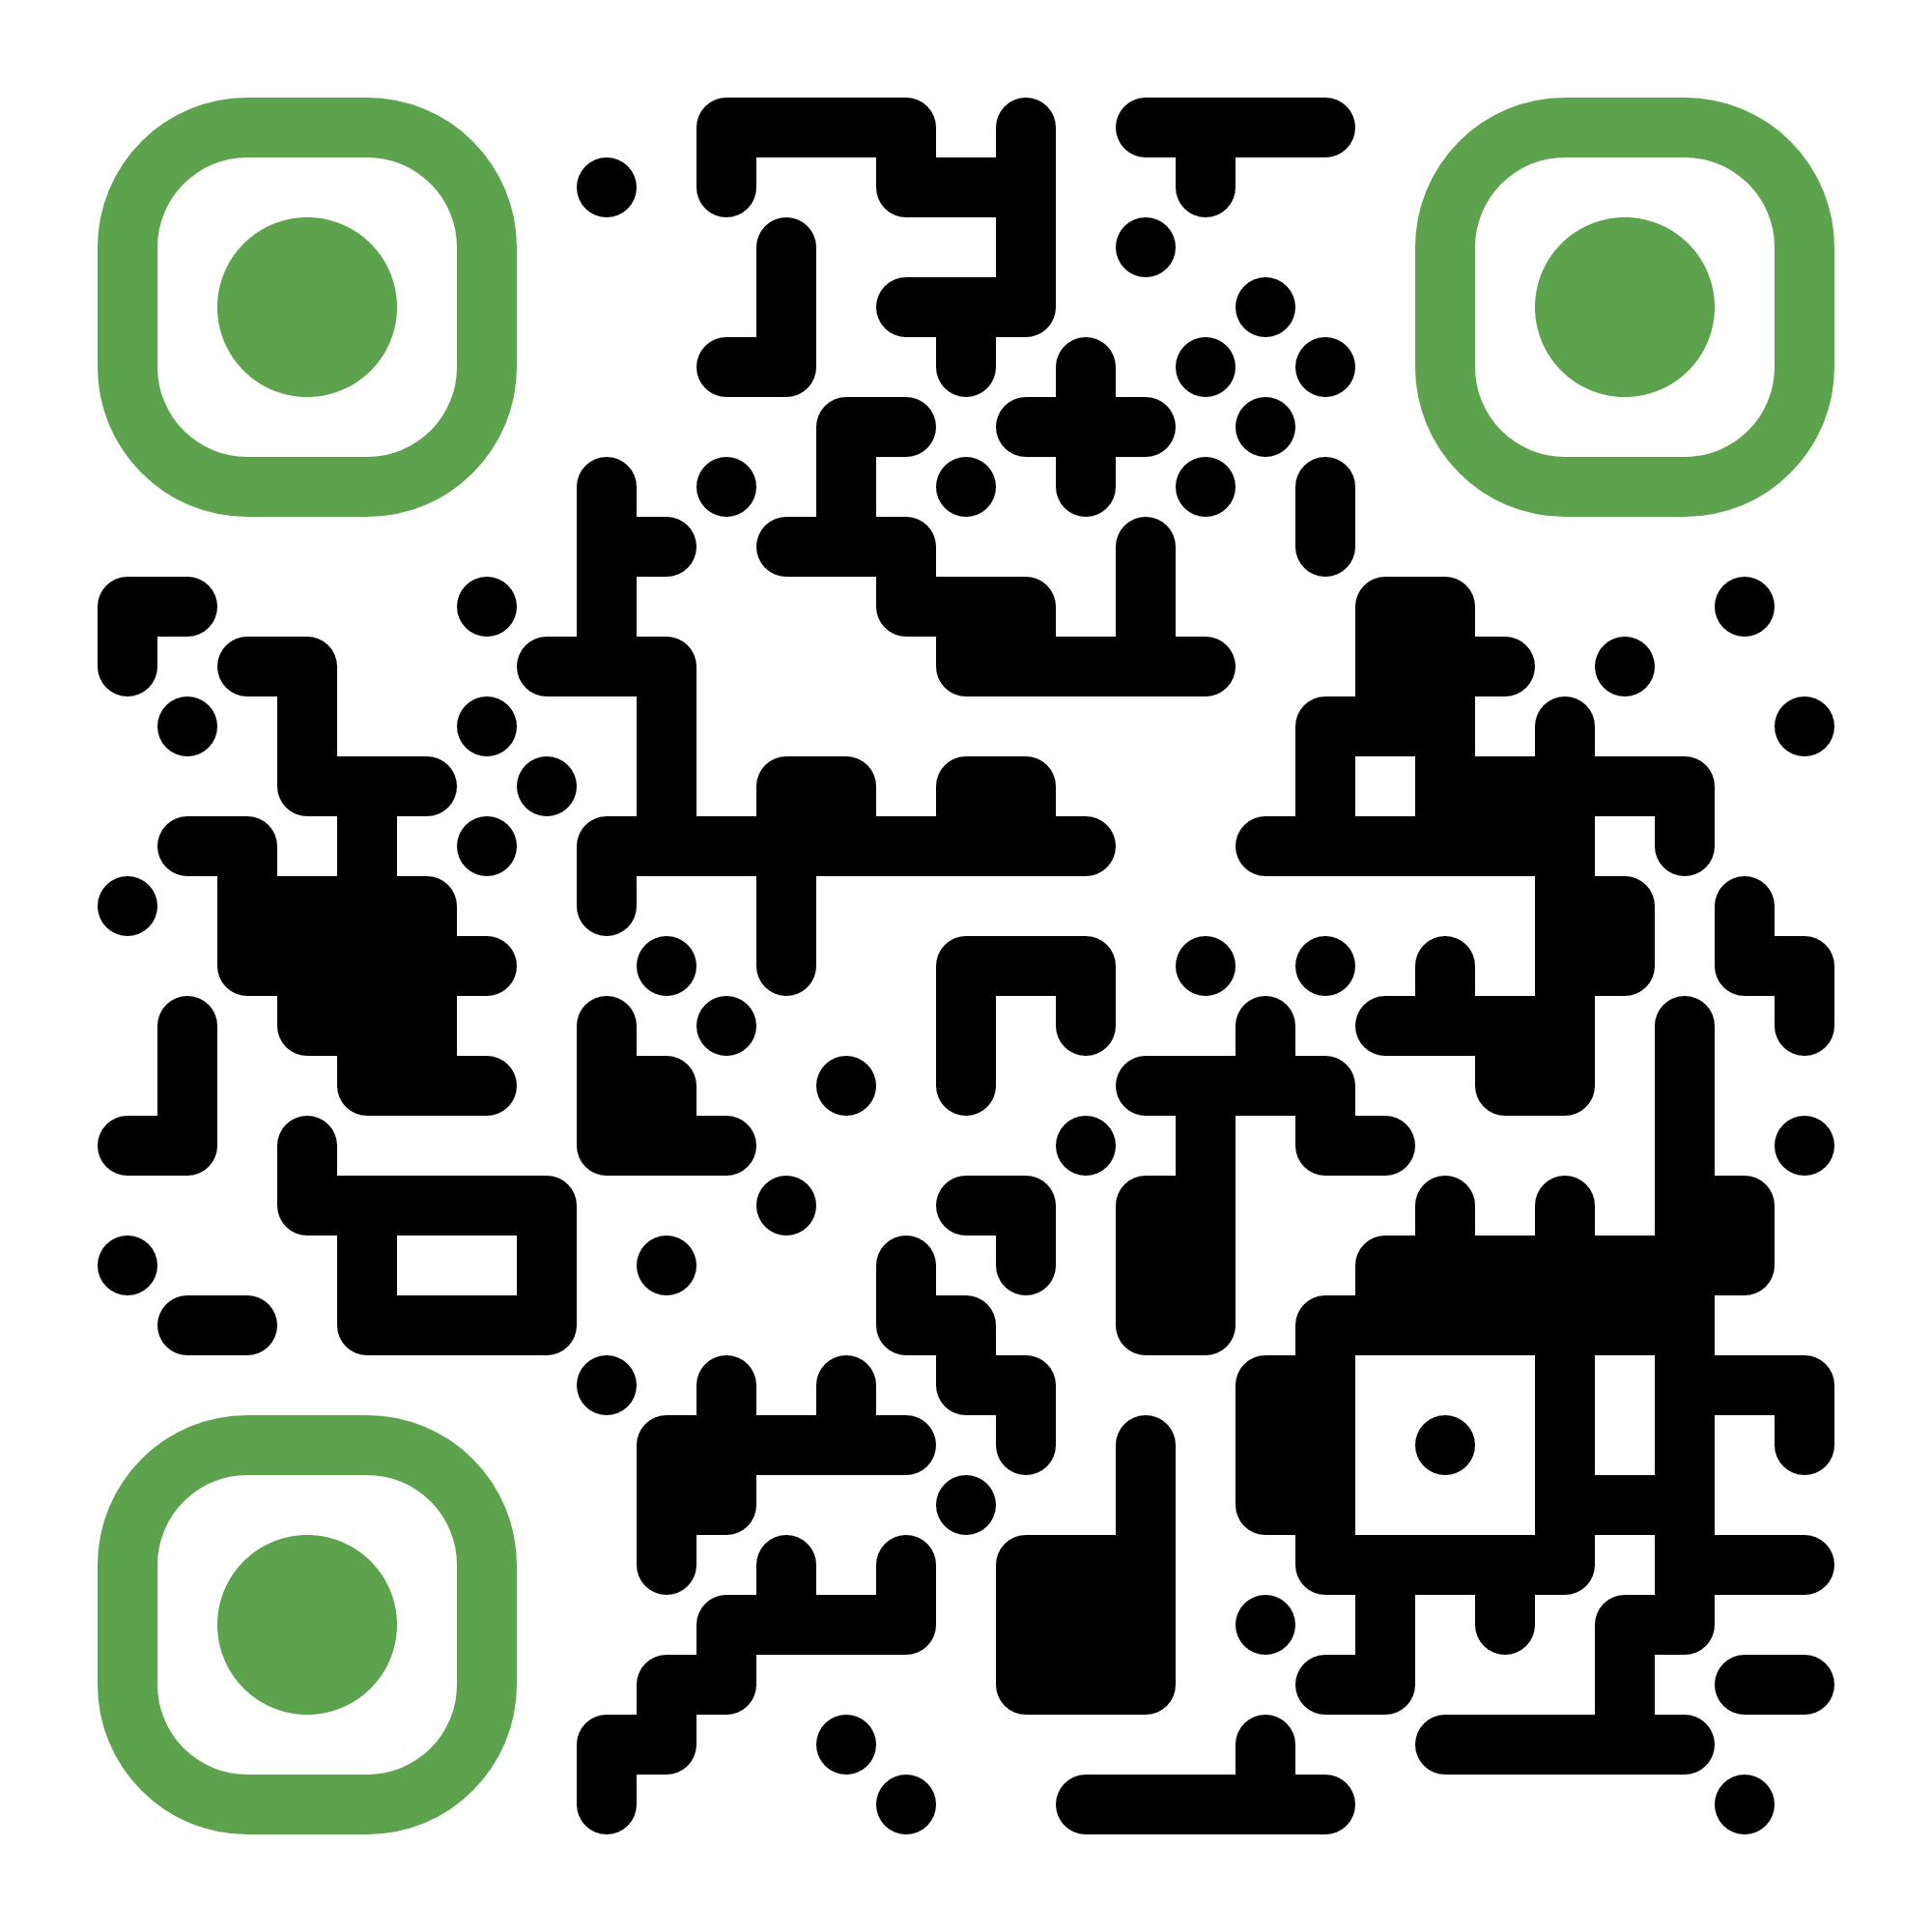 qrCode.png